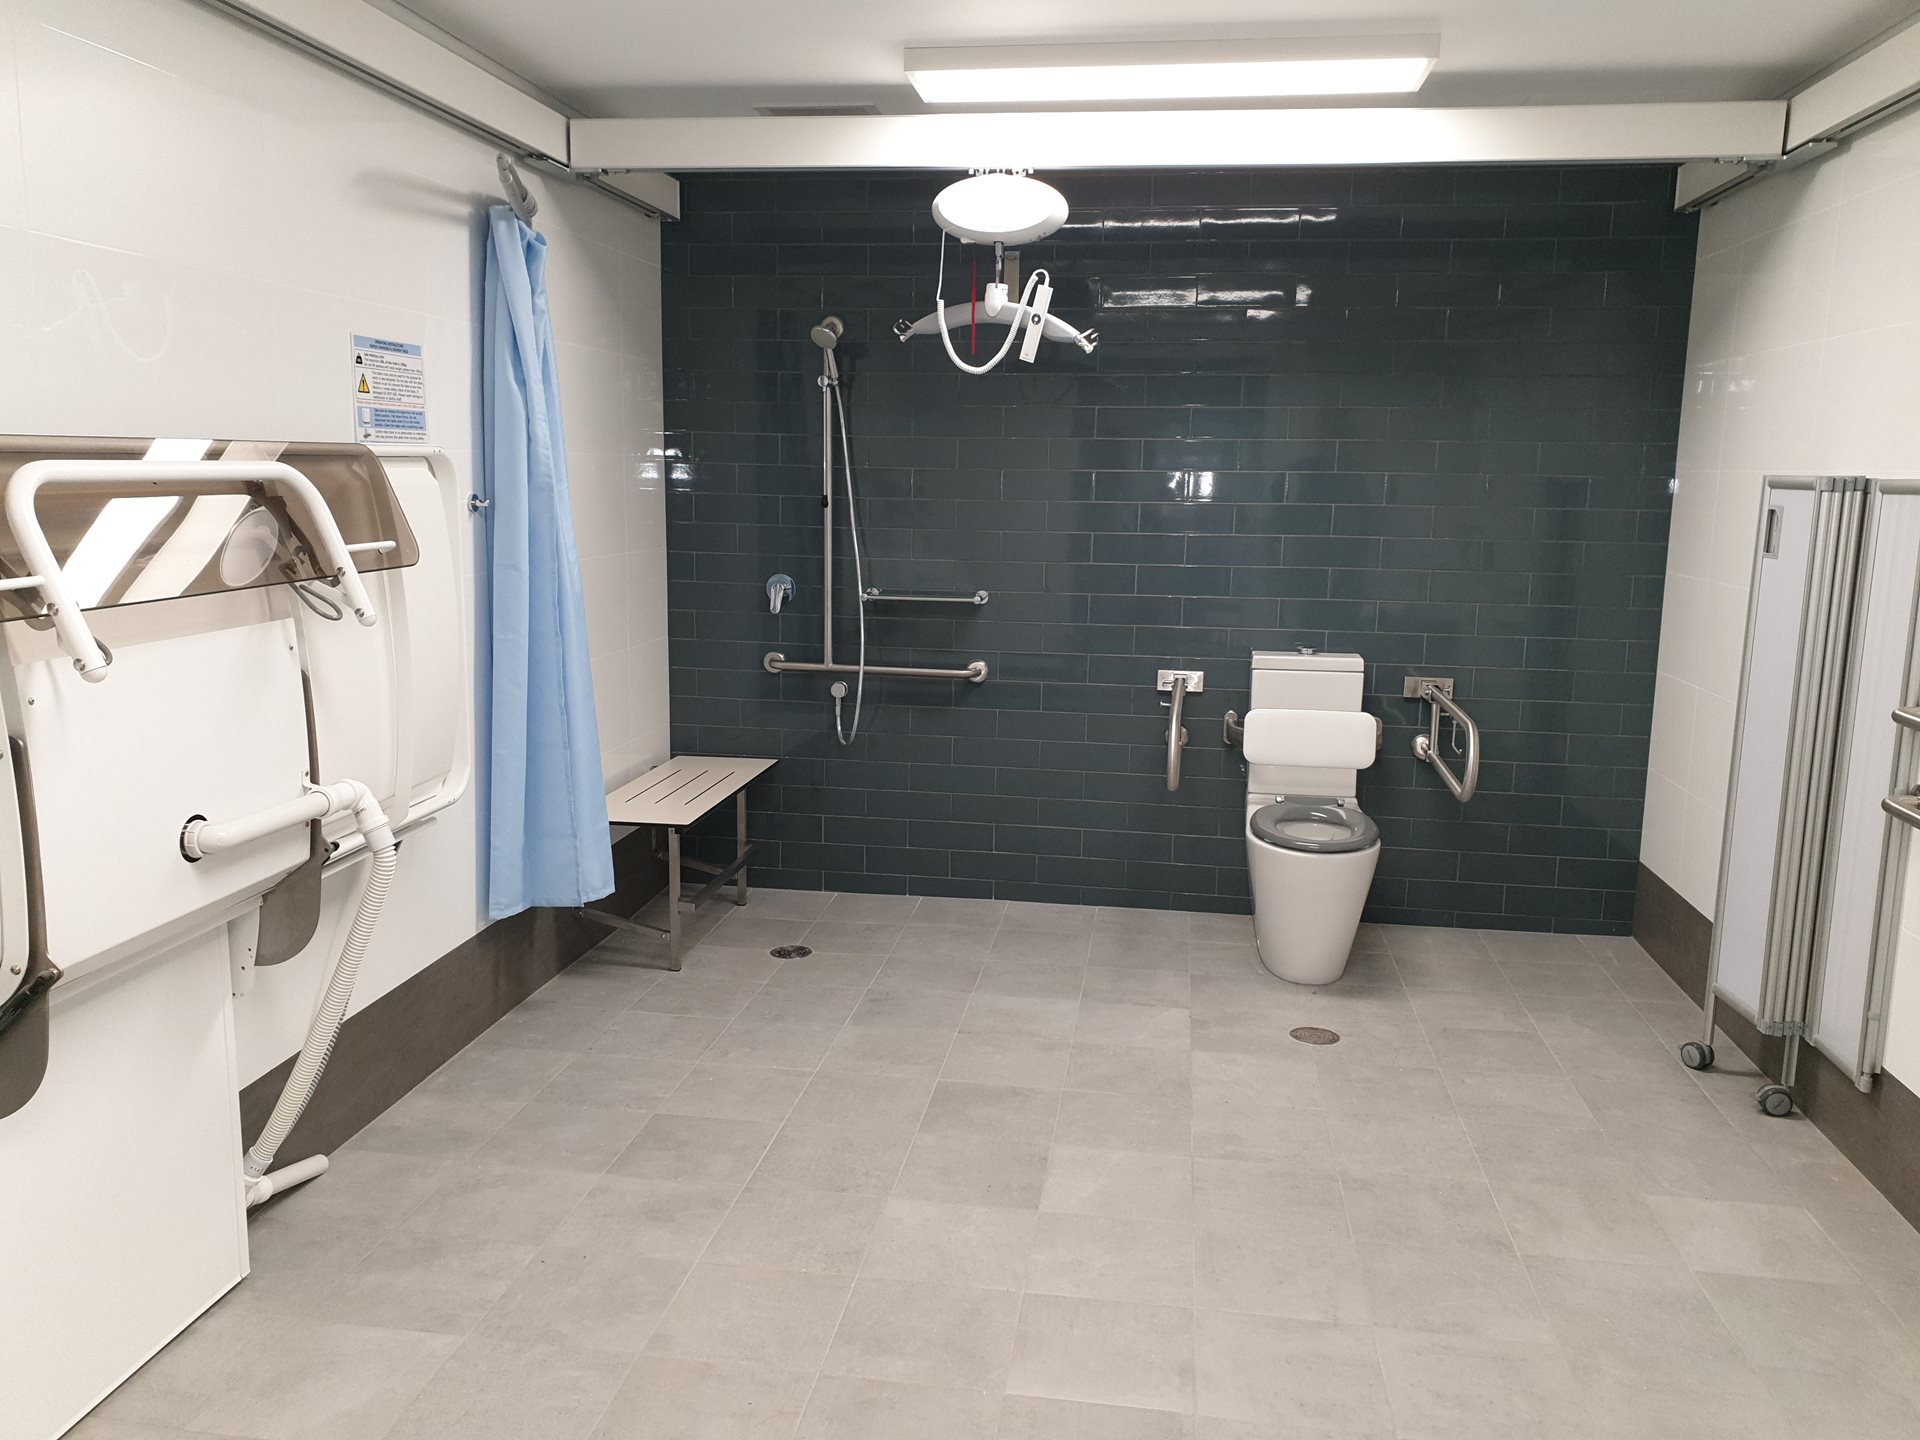 Belmont Oasis Leisure Centre Changing Places amenitites including toilet, change table, screen, hoist, shower and bench.